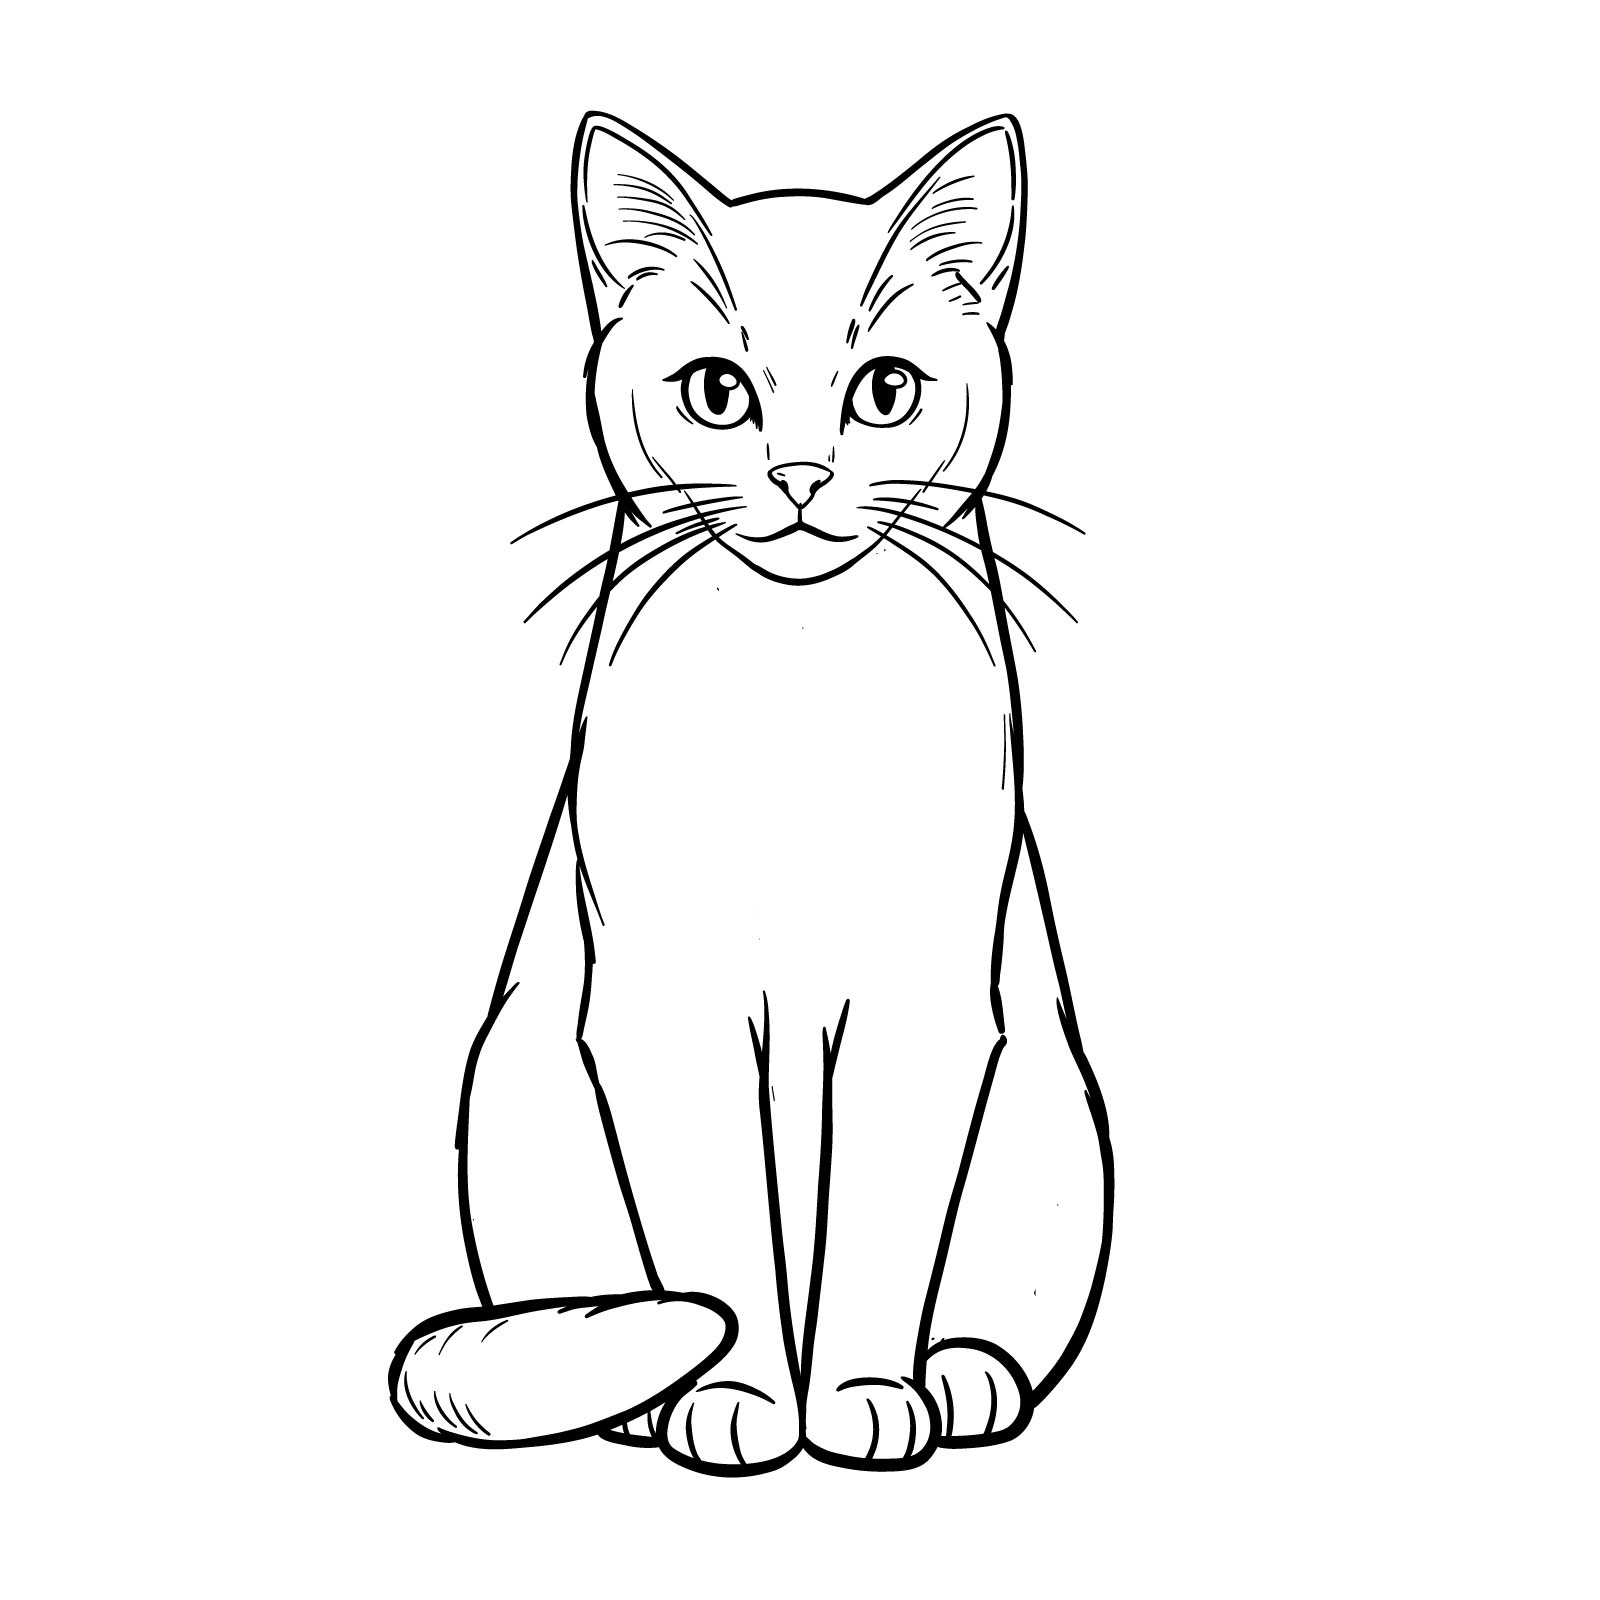 Completed drawing of a sitting cat capturing the essence of how to draw a sitting cat - step 16